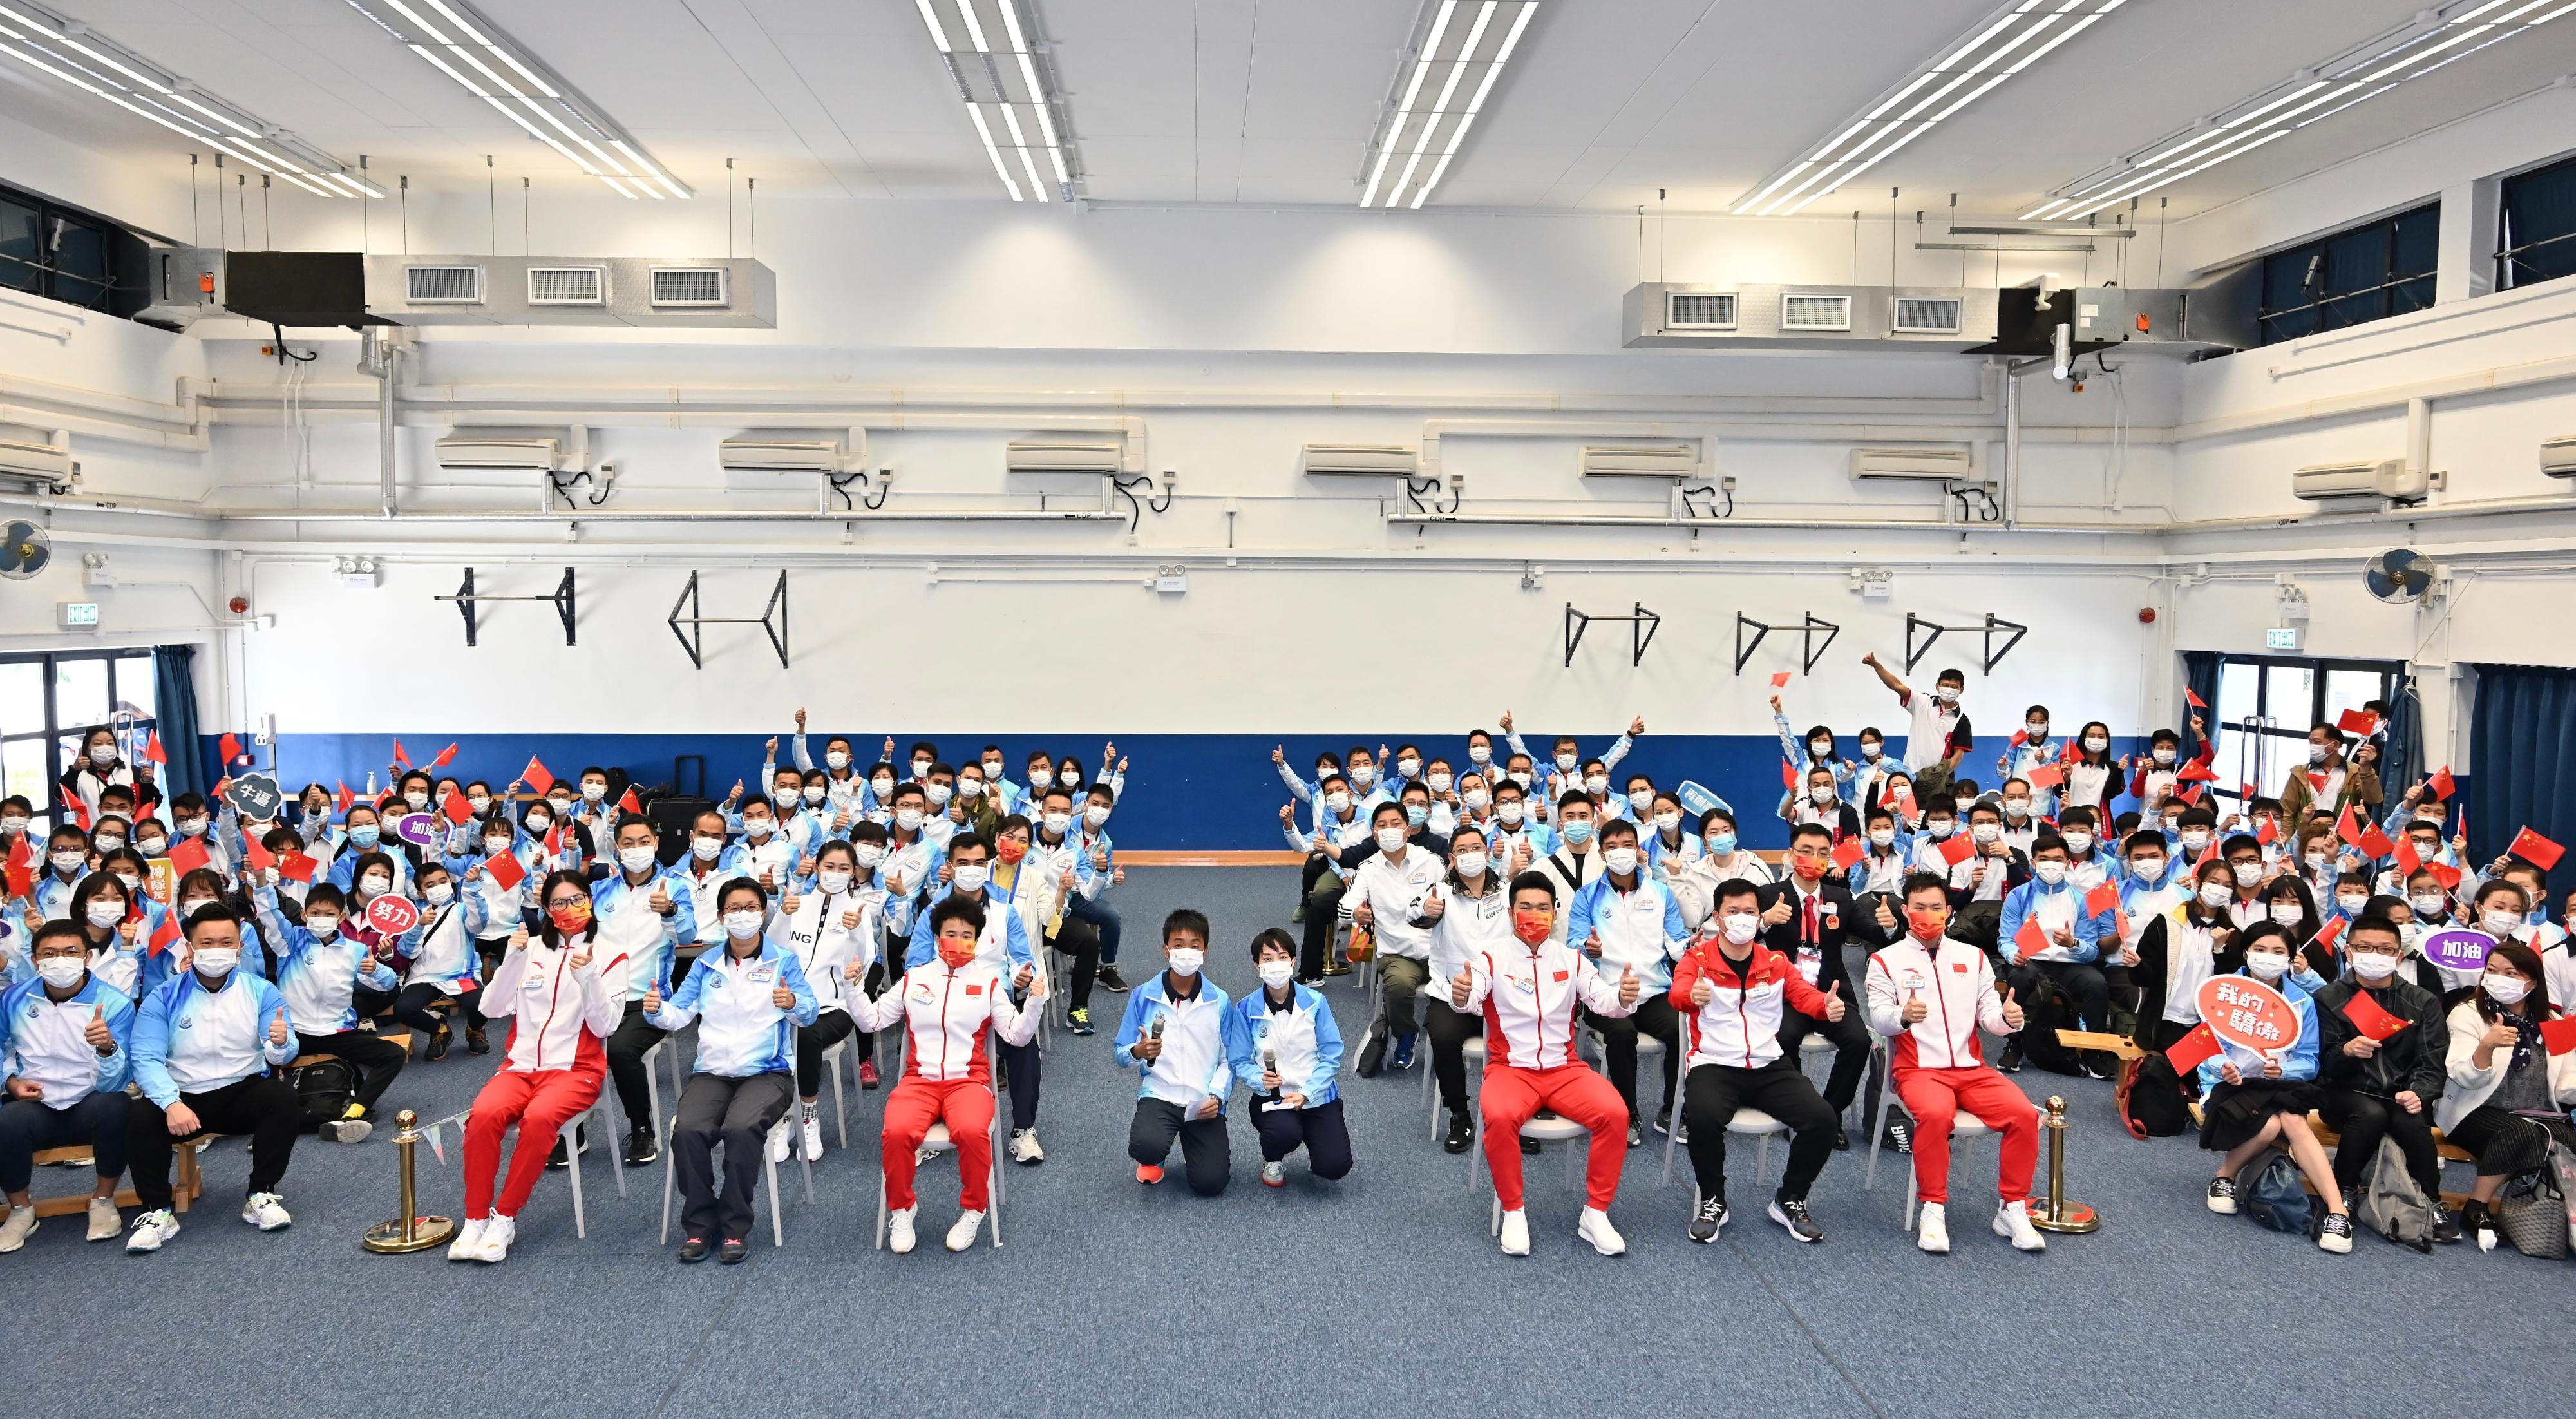 Four athlete representatives from the delegation of Tokyo 2020 Olympic Games Mainland Olympians, who arrived in Hong Kong on December 3 for a three-day visit, met with members of Junior Police Call (JPC) at the Hong Kong Police College this morning (December 5). Photo shows the delegation members in a group photo with guests and JPC members. 